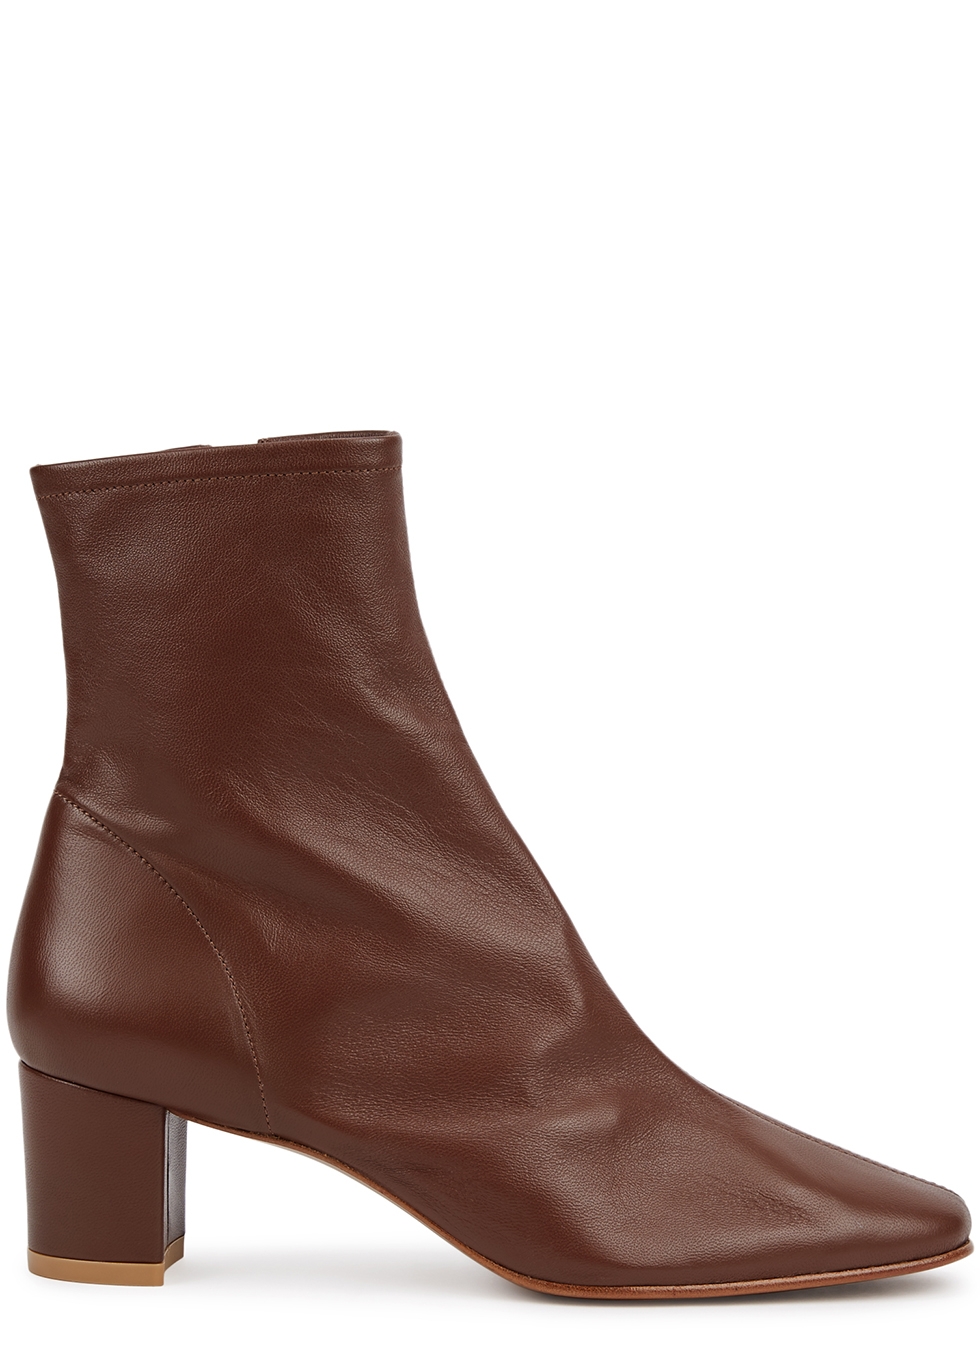 Sofia 65 brown leather ankle boots